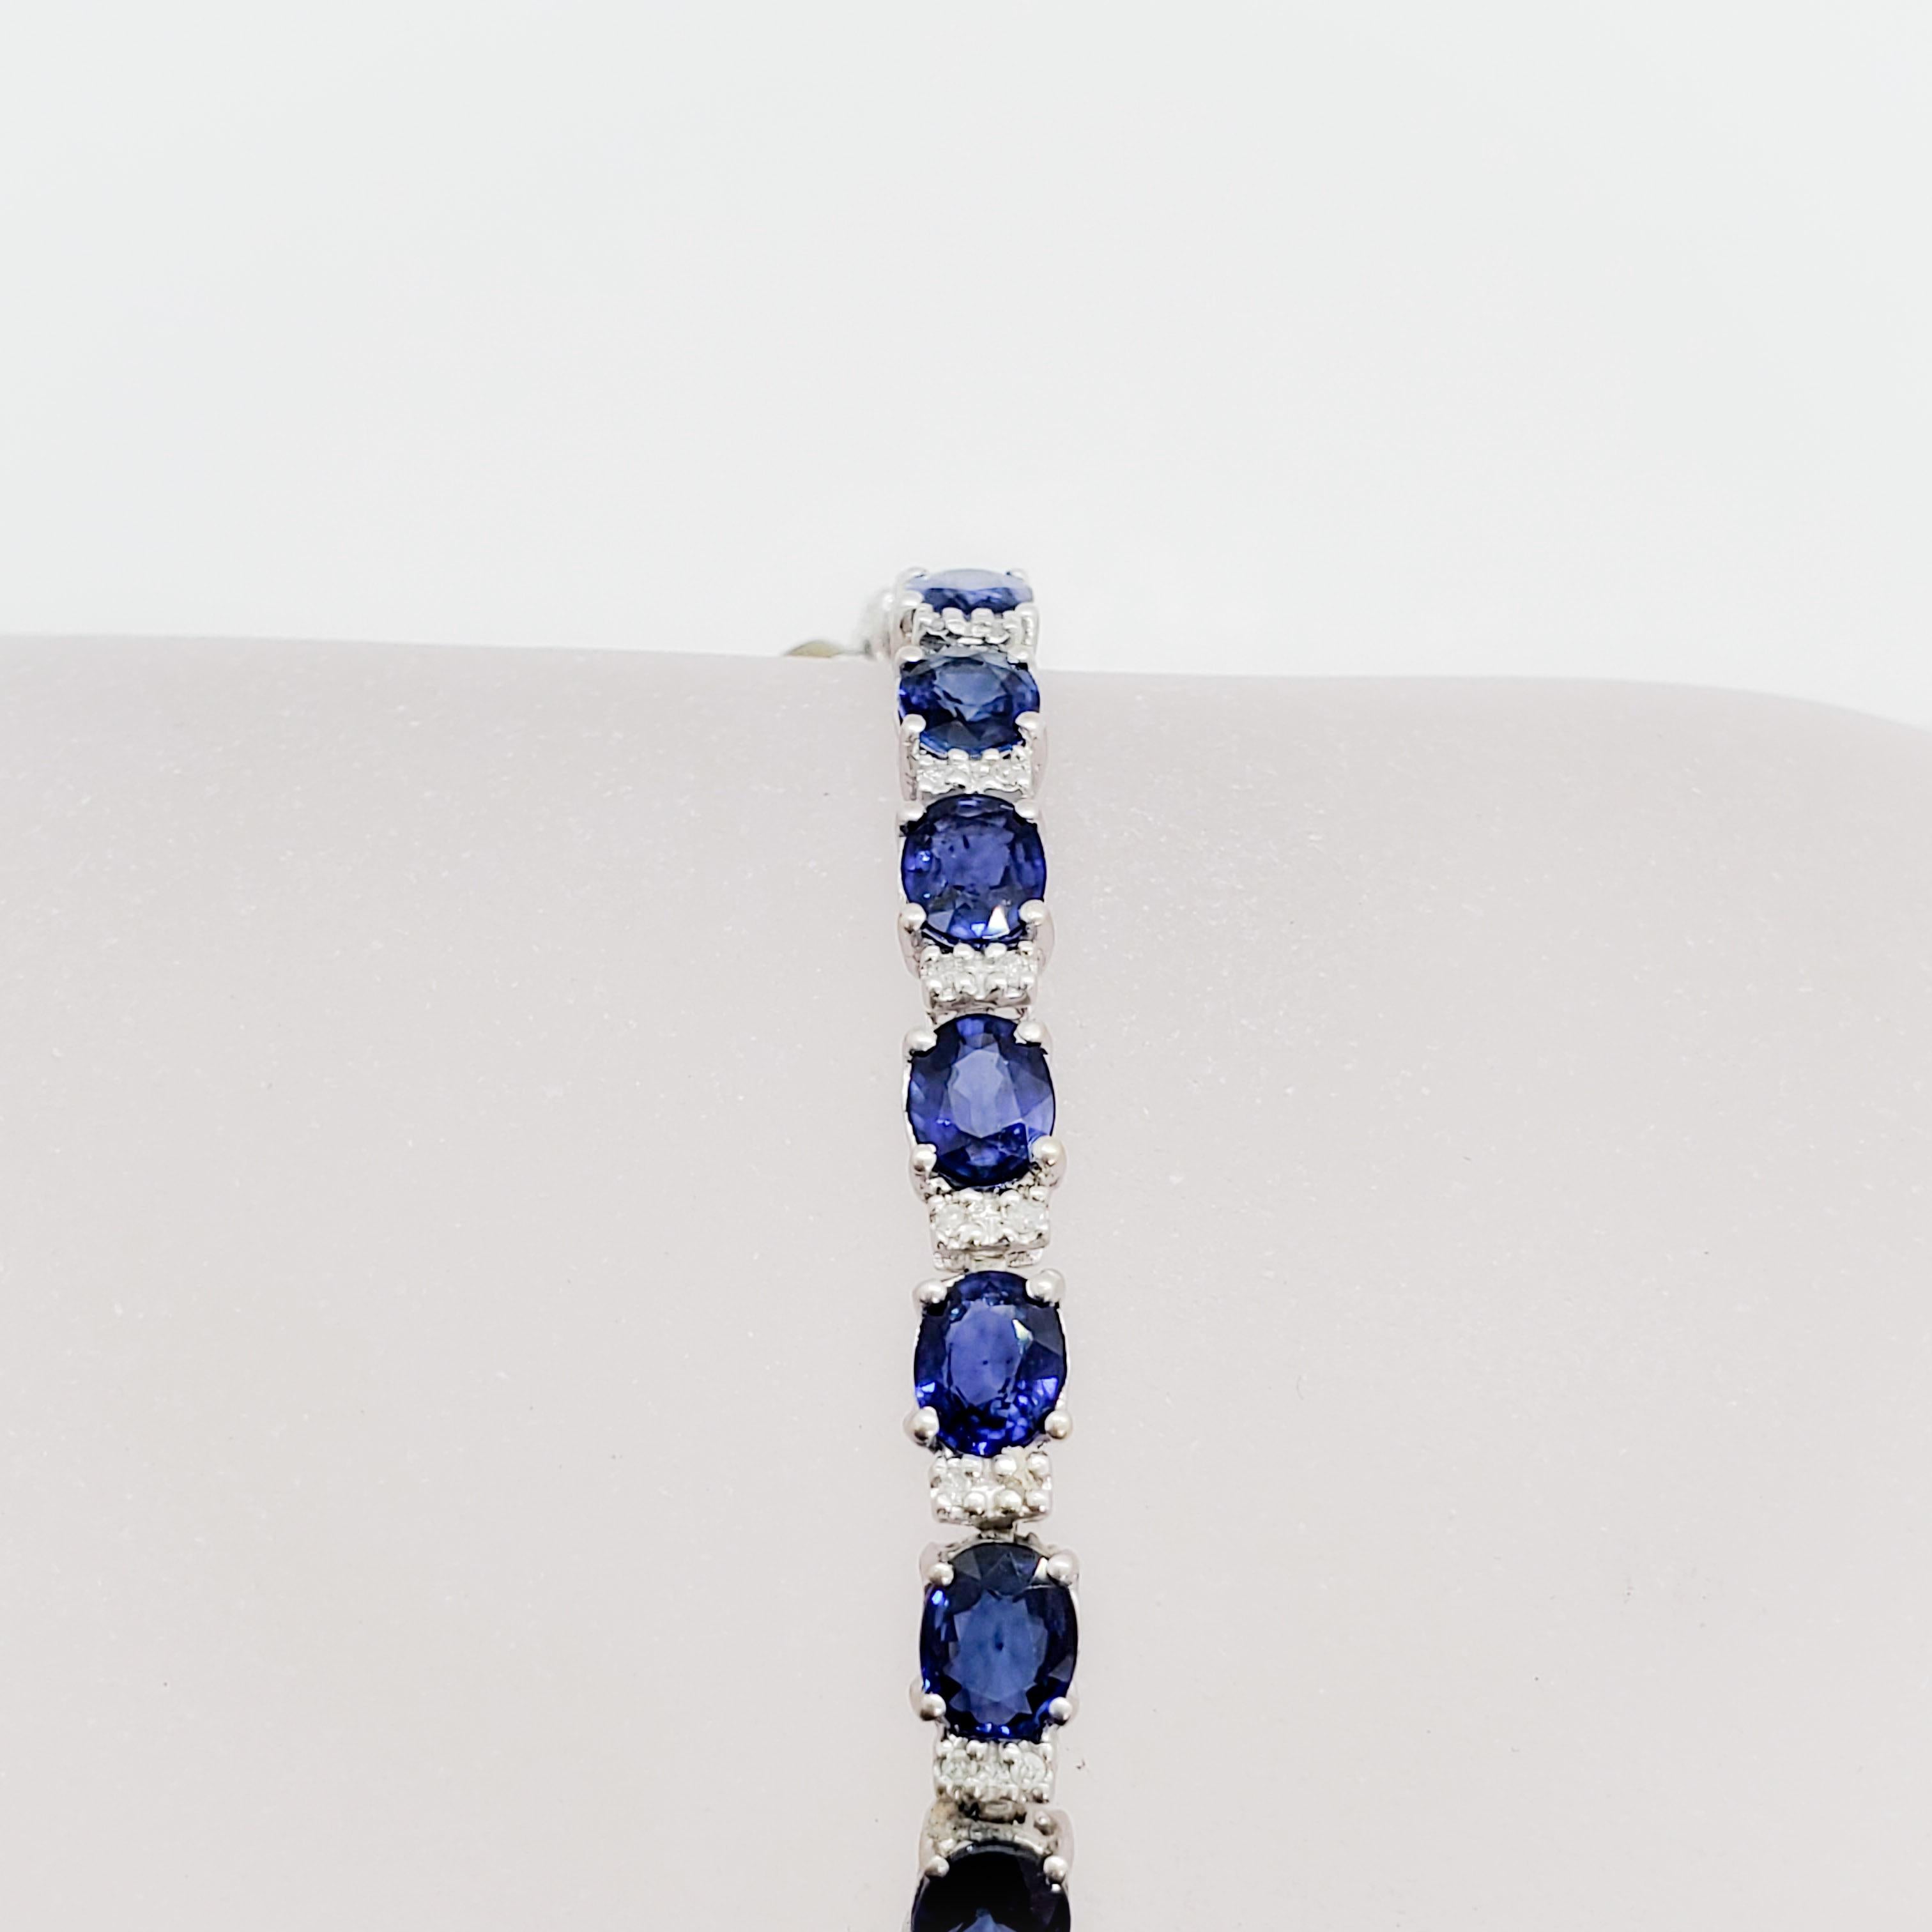 Beautiful classic Effy estate blue sapphire oval and white diamond round bracelet in 14k white gold. Blue sapphire ovals are bright and deep blue weighing 6.76 cts and white diamonds are bright and clean weighing 1.00 cts. Perfect for stacking or